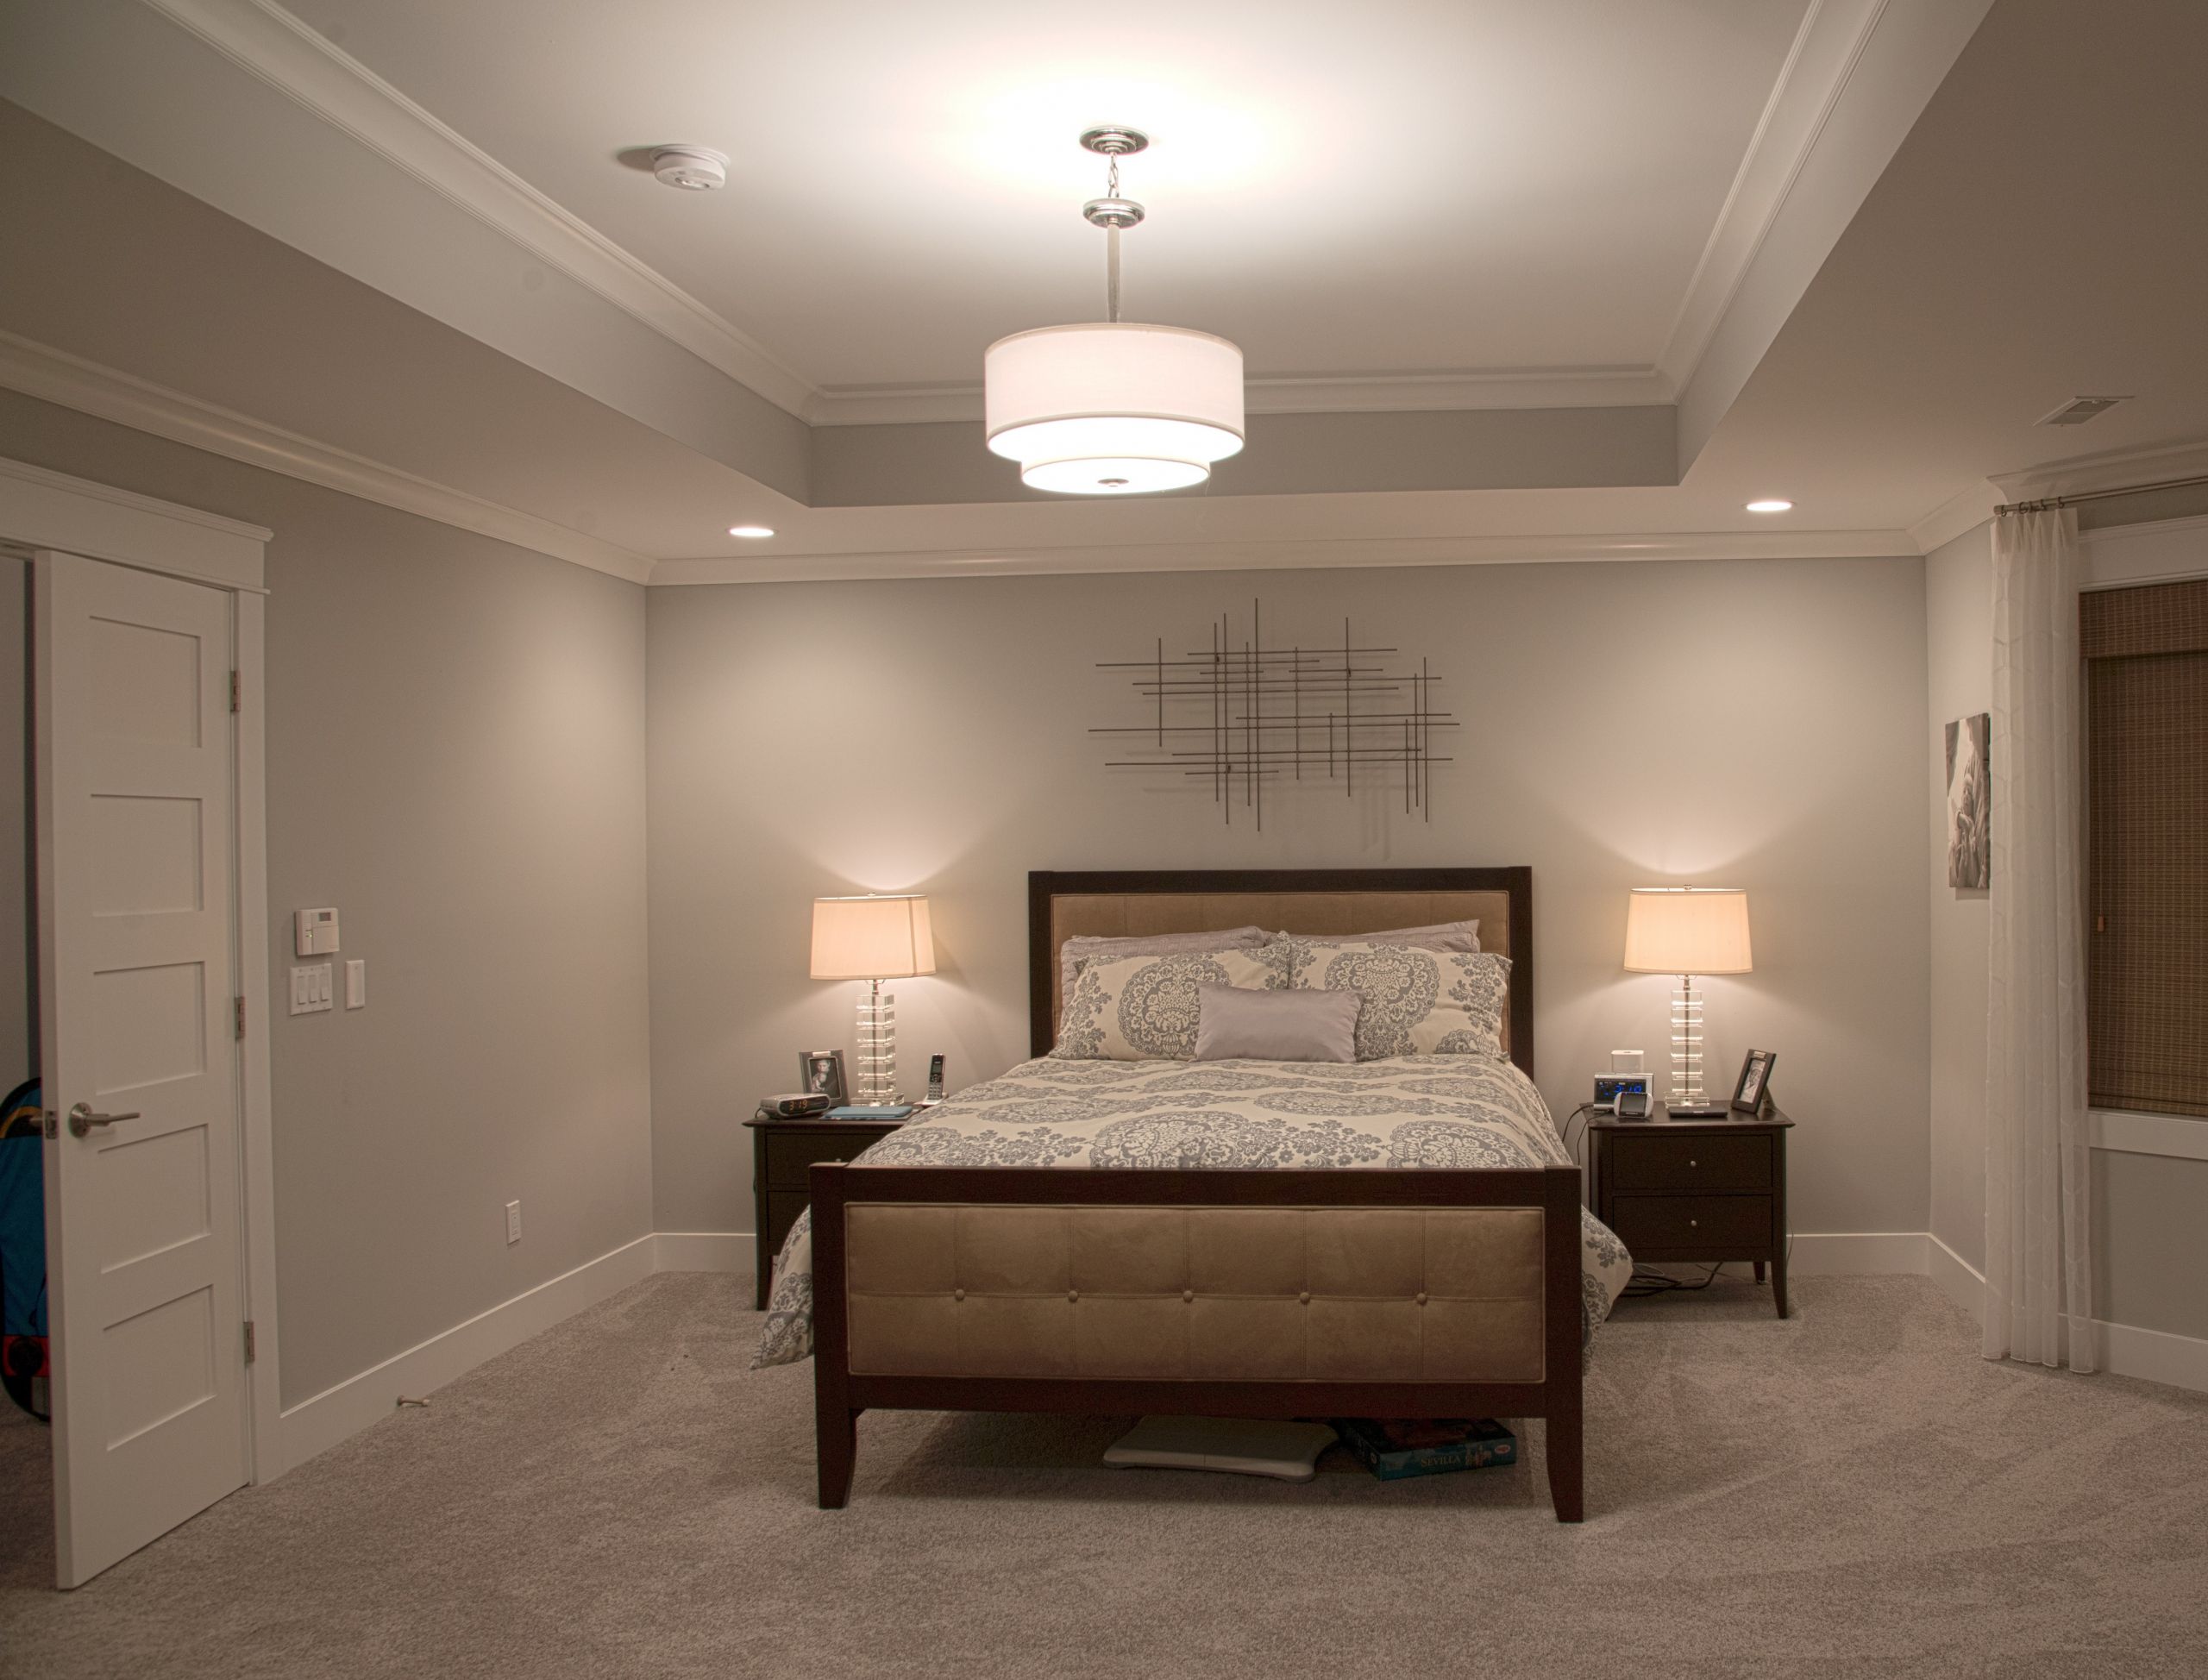 Bedroom Lighting Ideas Ceiling
 What s Your Design Style Gross Electric